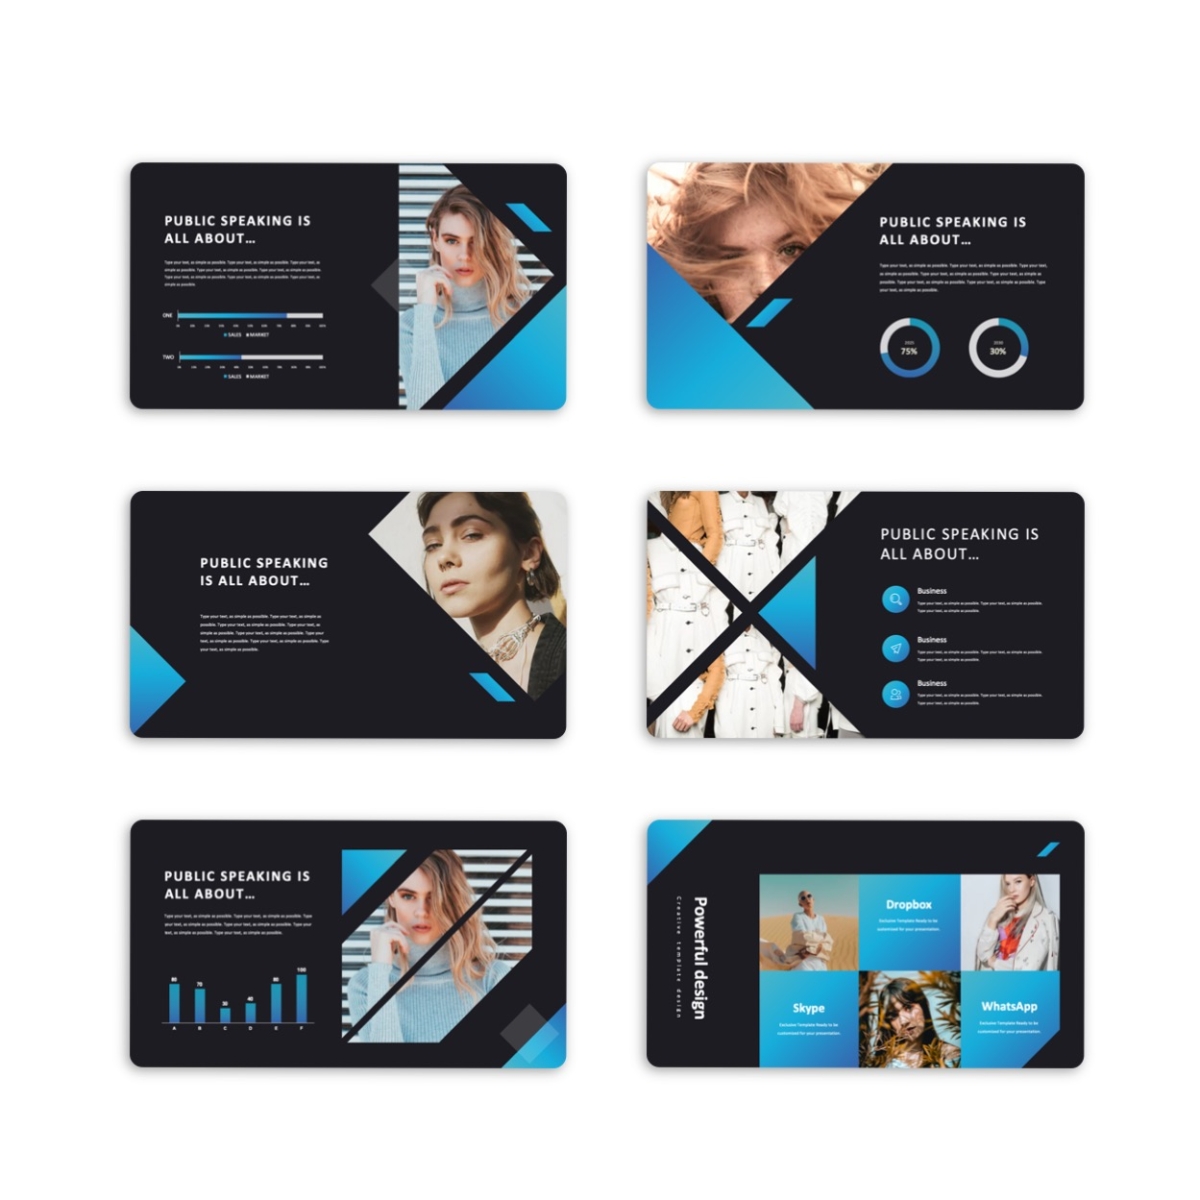 Annual Report & Multipurpose Powerpoint Template